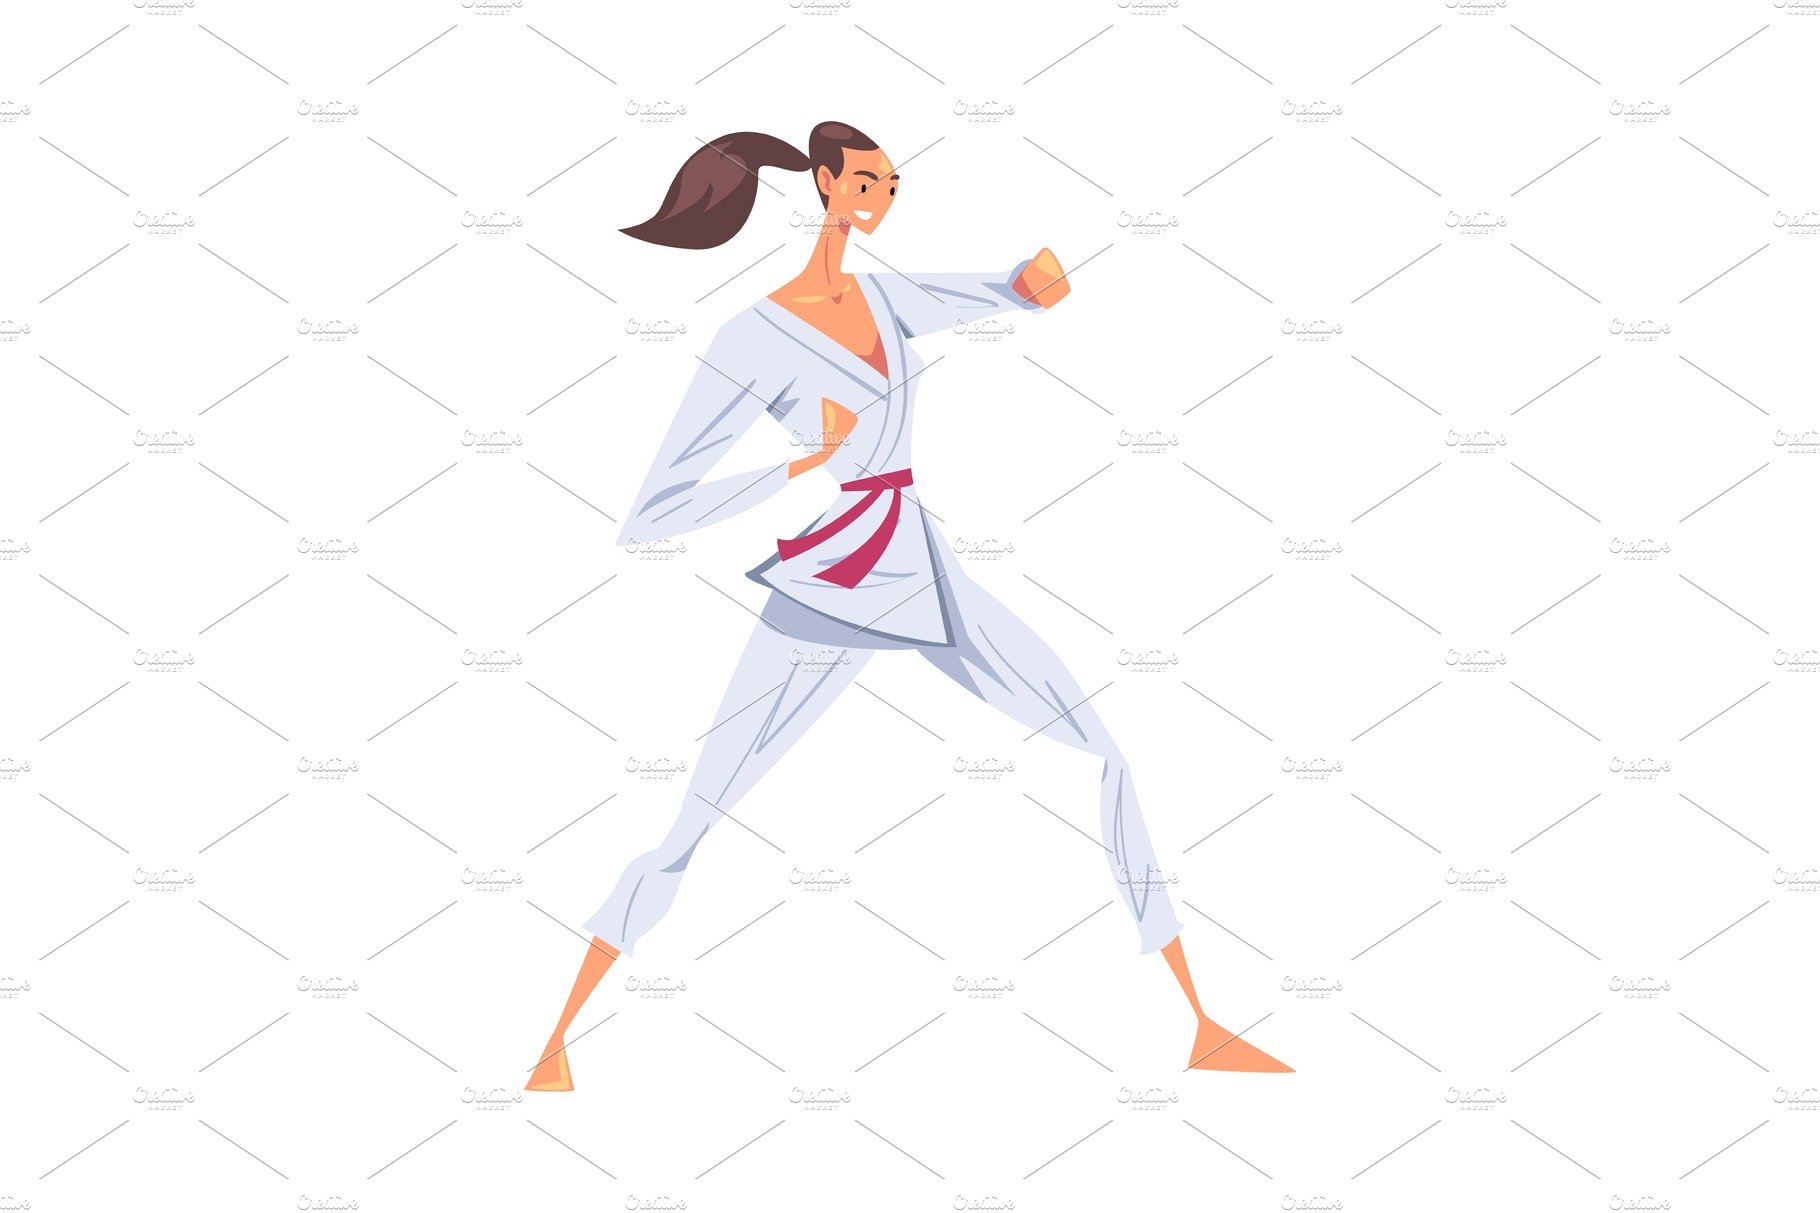 Girl Standing in Fighting Stance cover image.